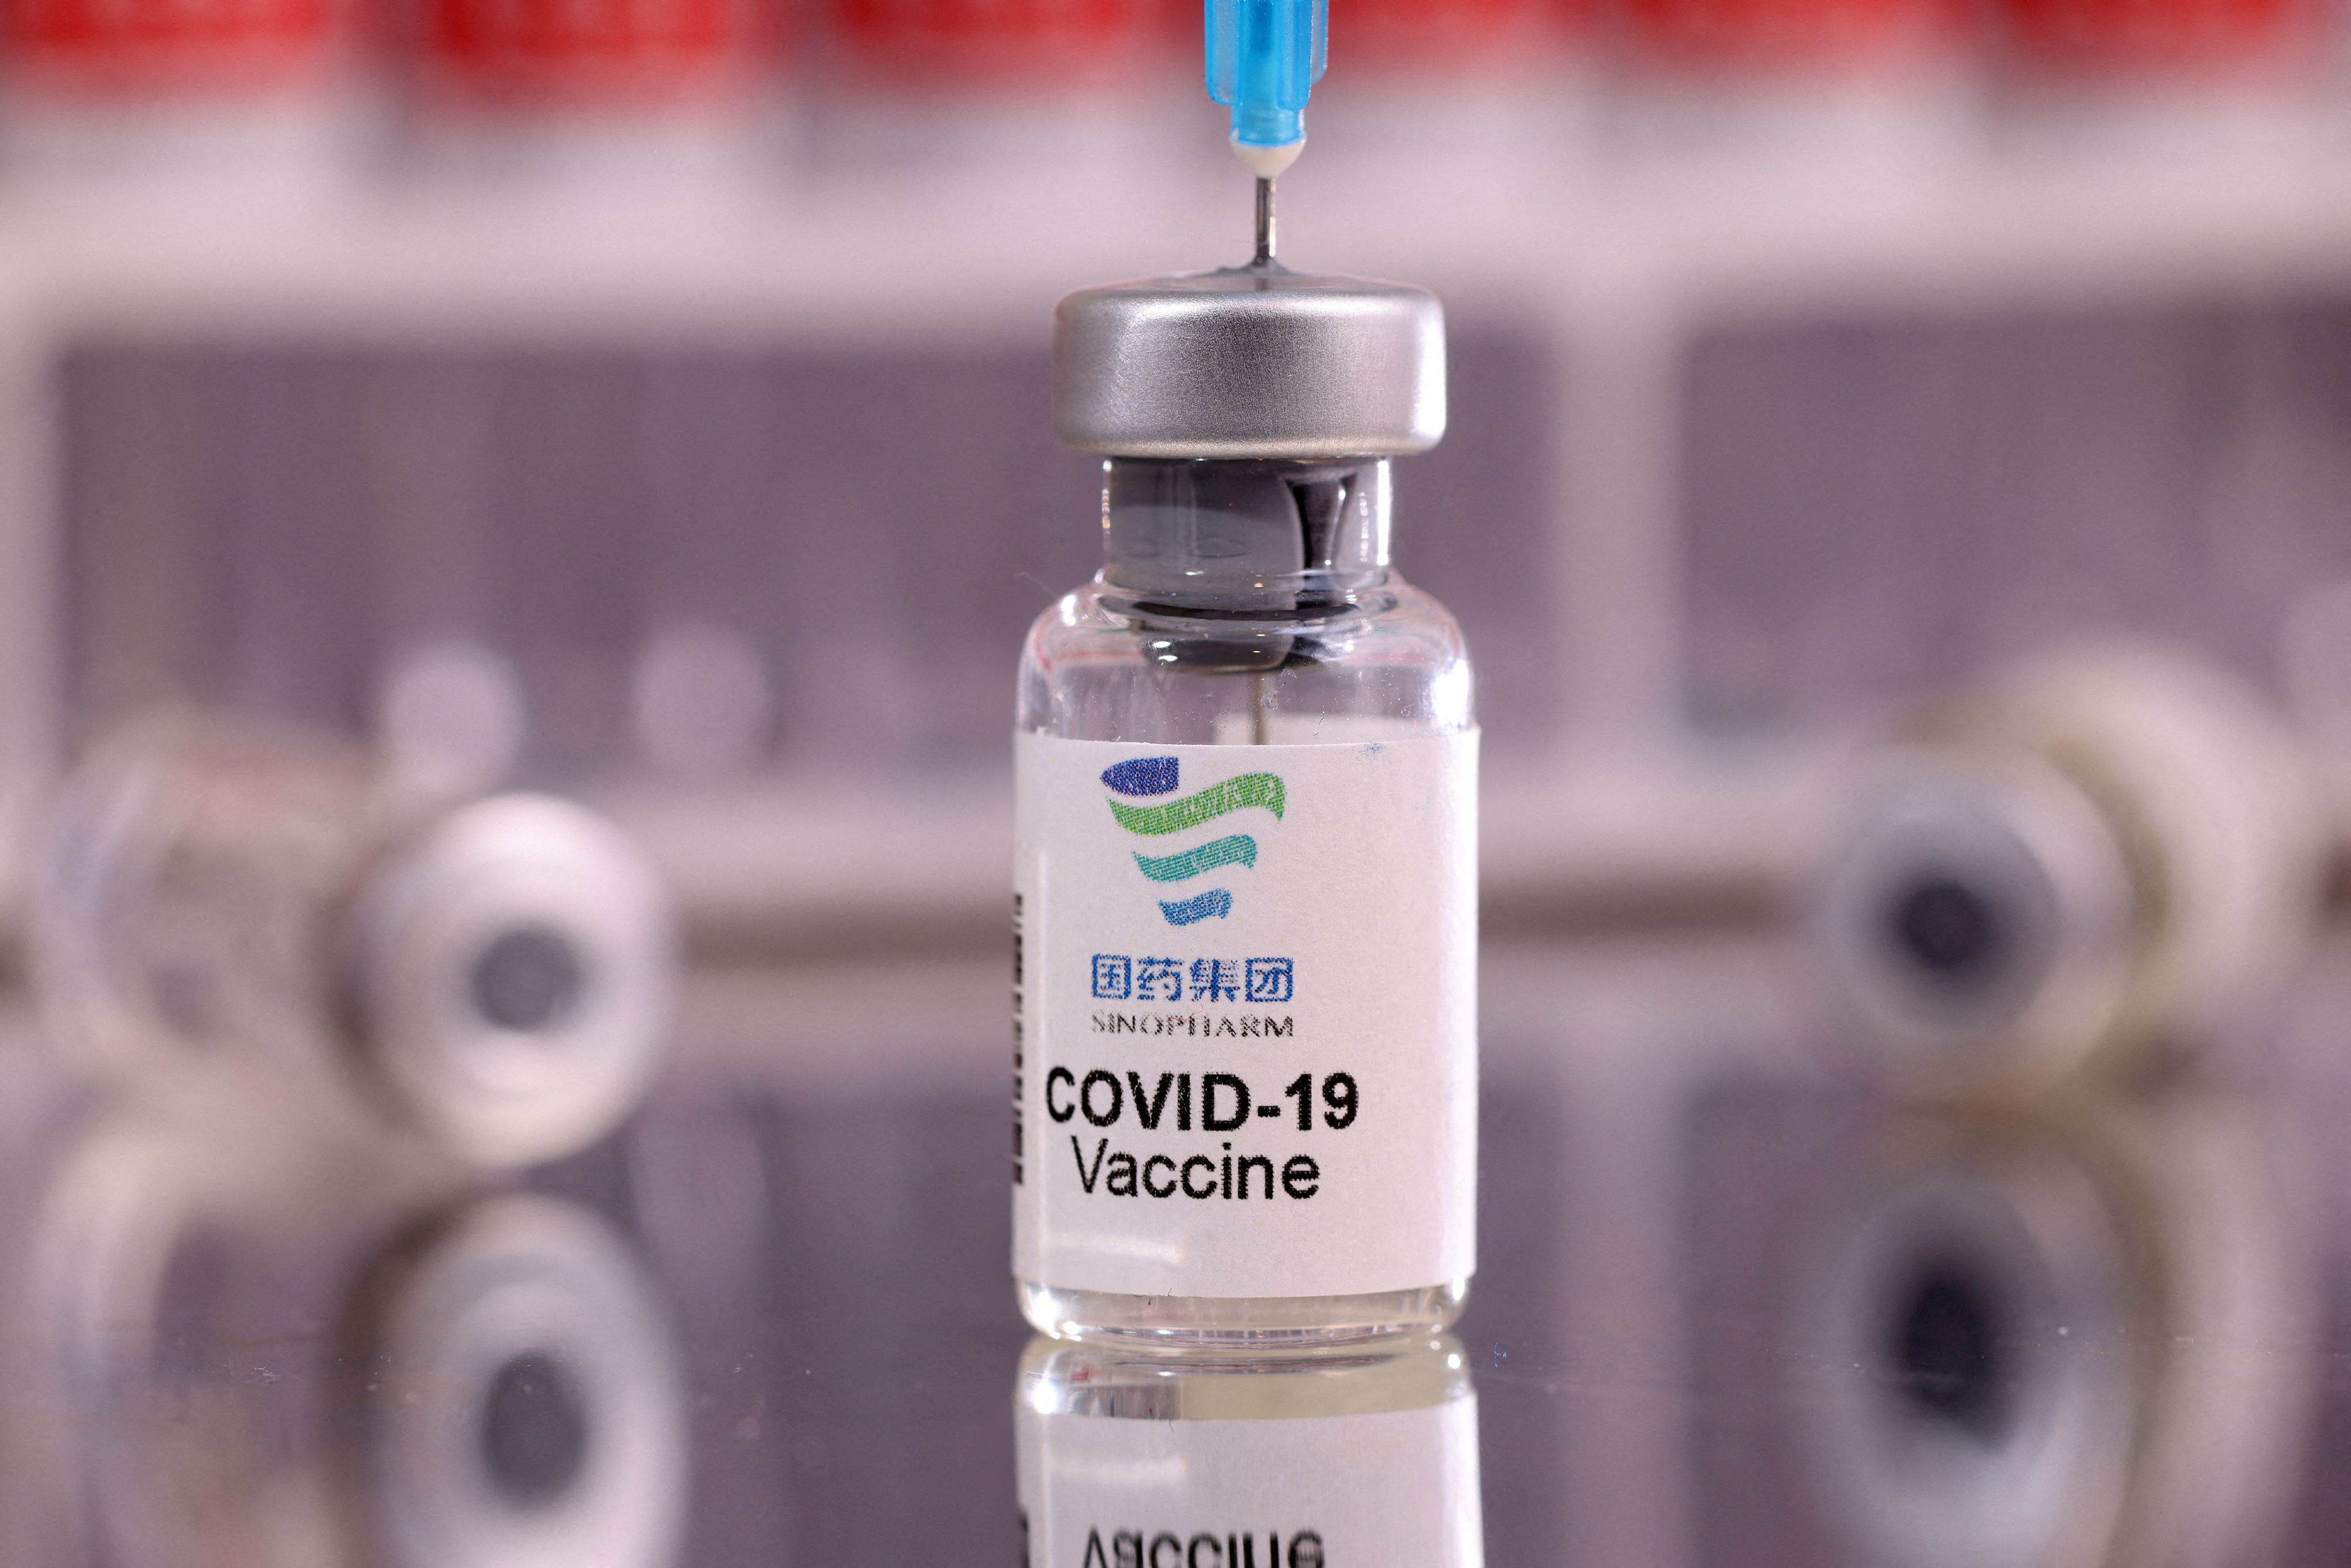 Illustration shows vial labelled "Sinopharm COVID-19 Vaccine\